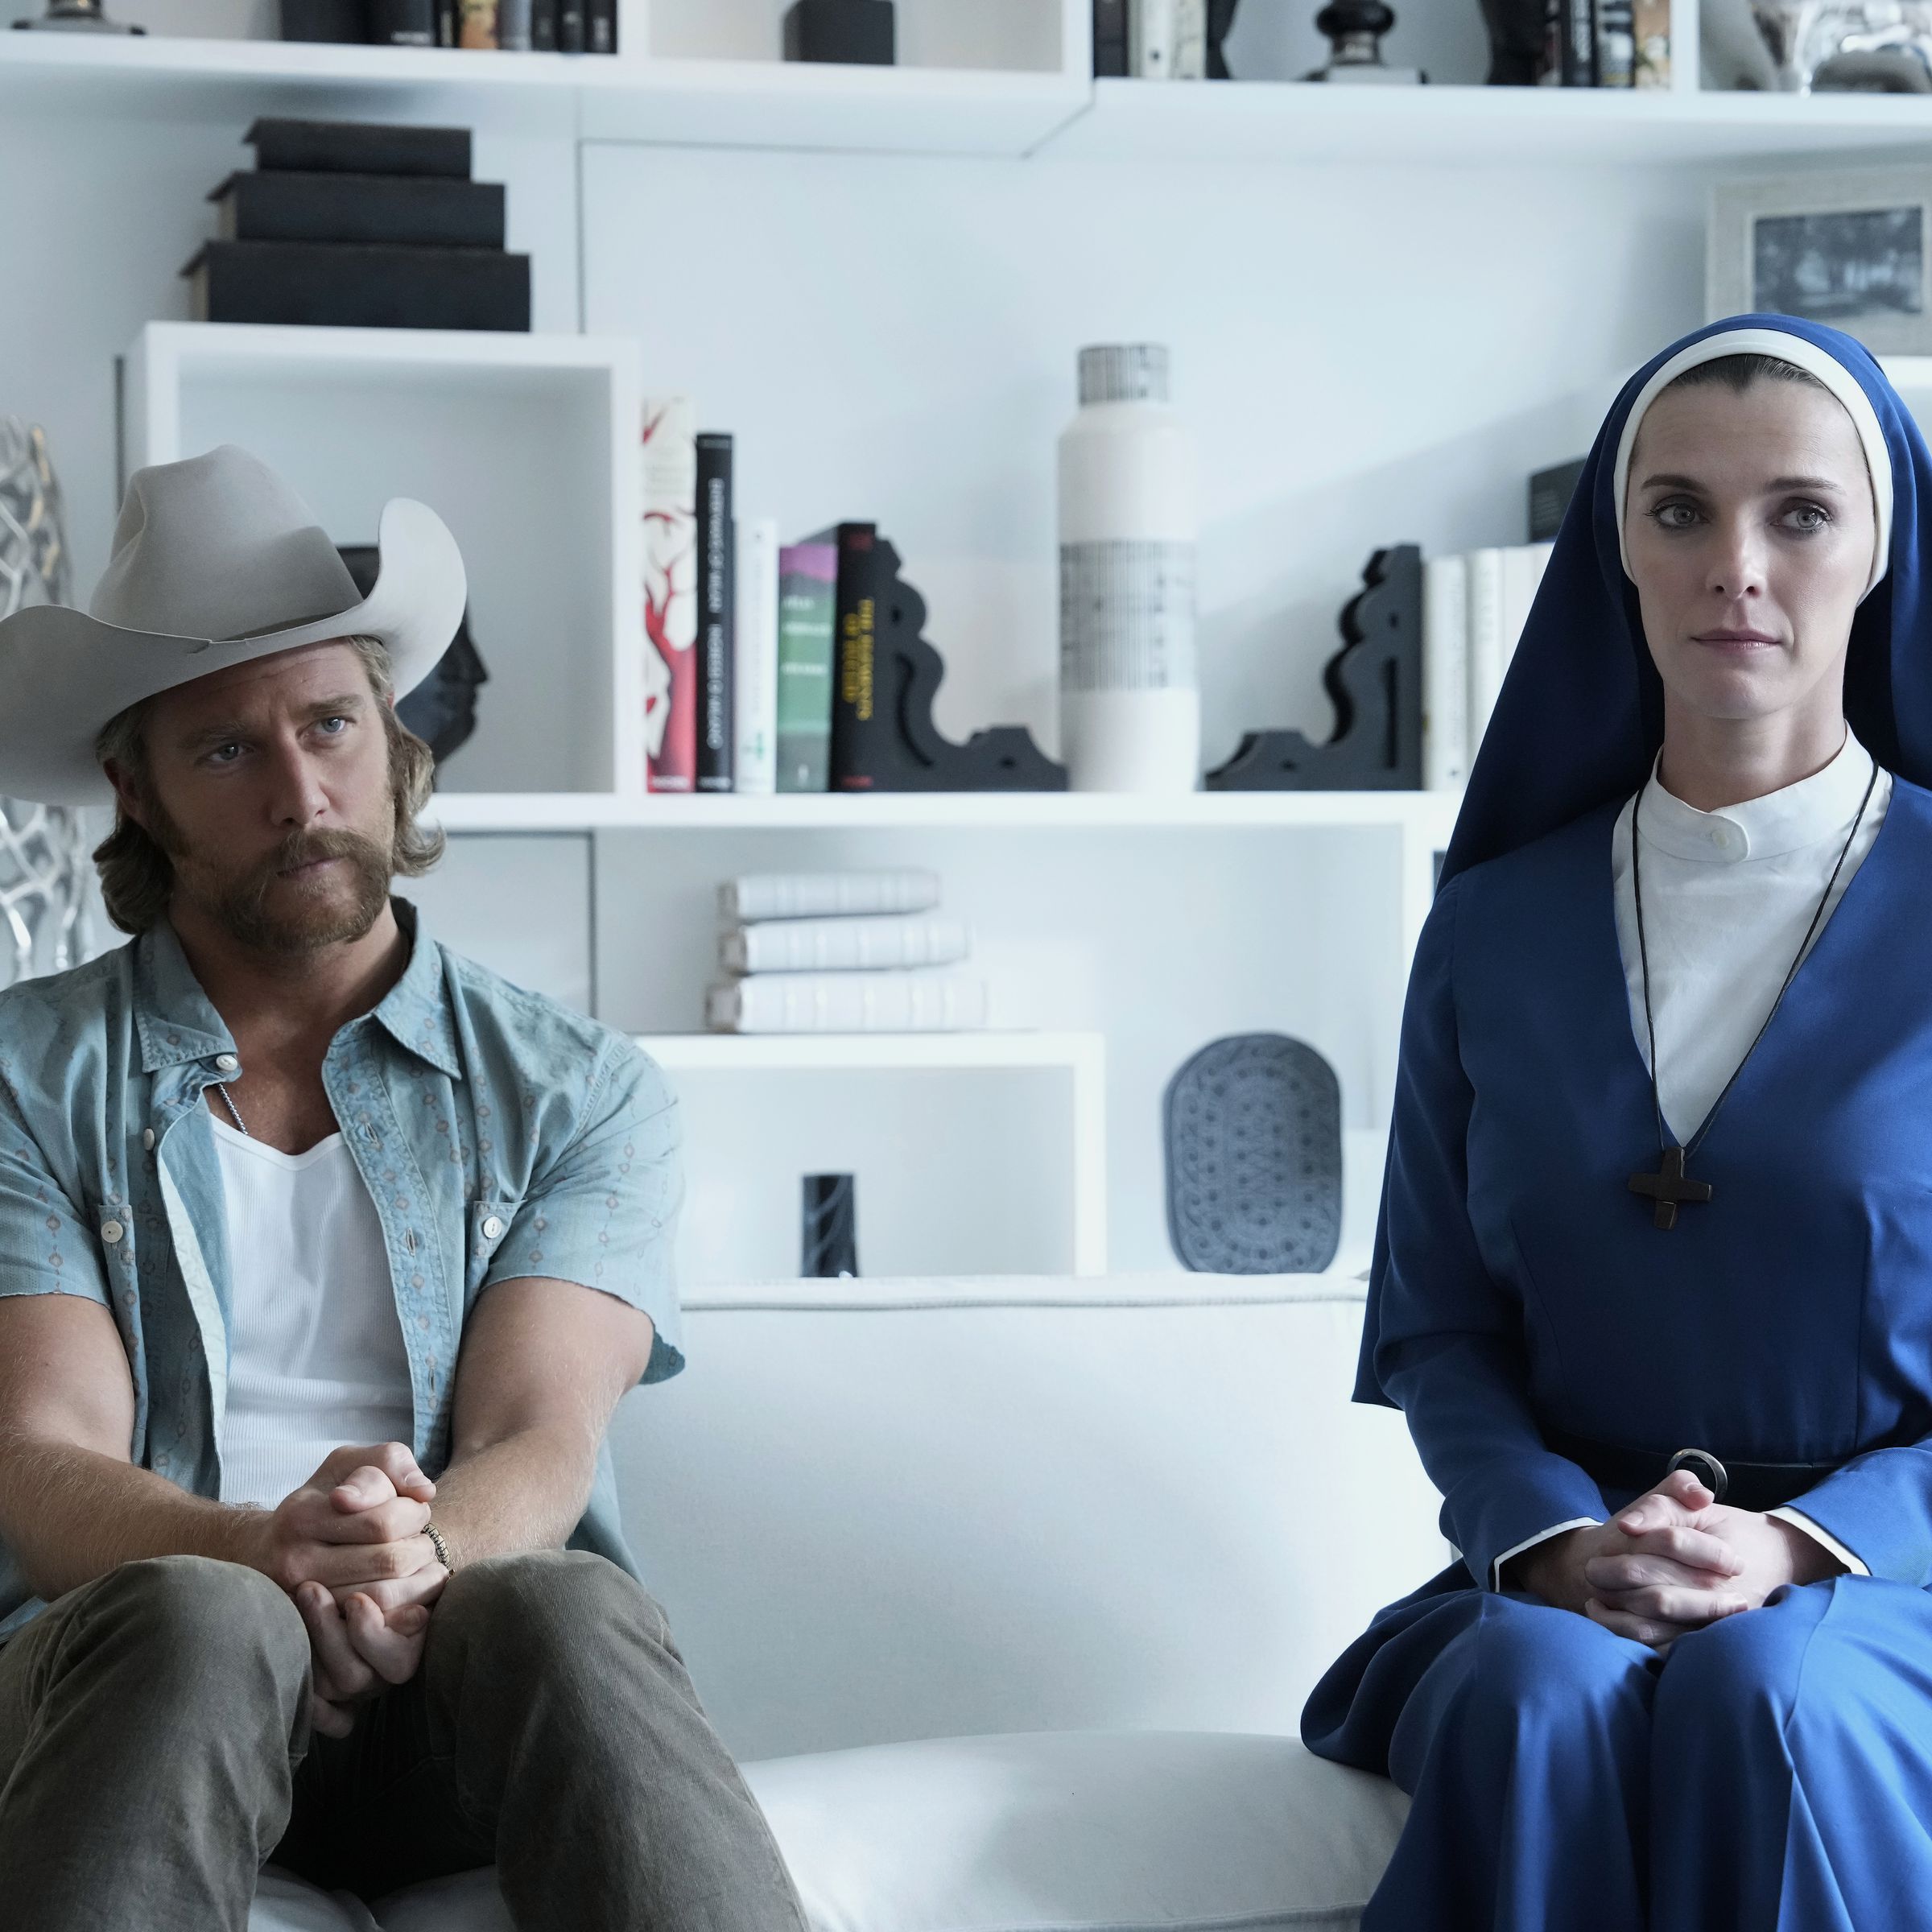 A white man wearing a white cowboy hat and sporting a very large blond mustache sits next to a white woman in a blue nun habit. They are seated very far apart on a white couch in a white room.